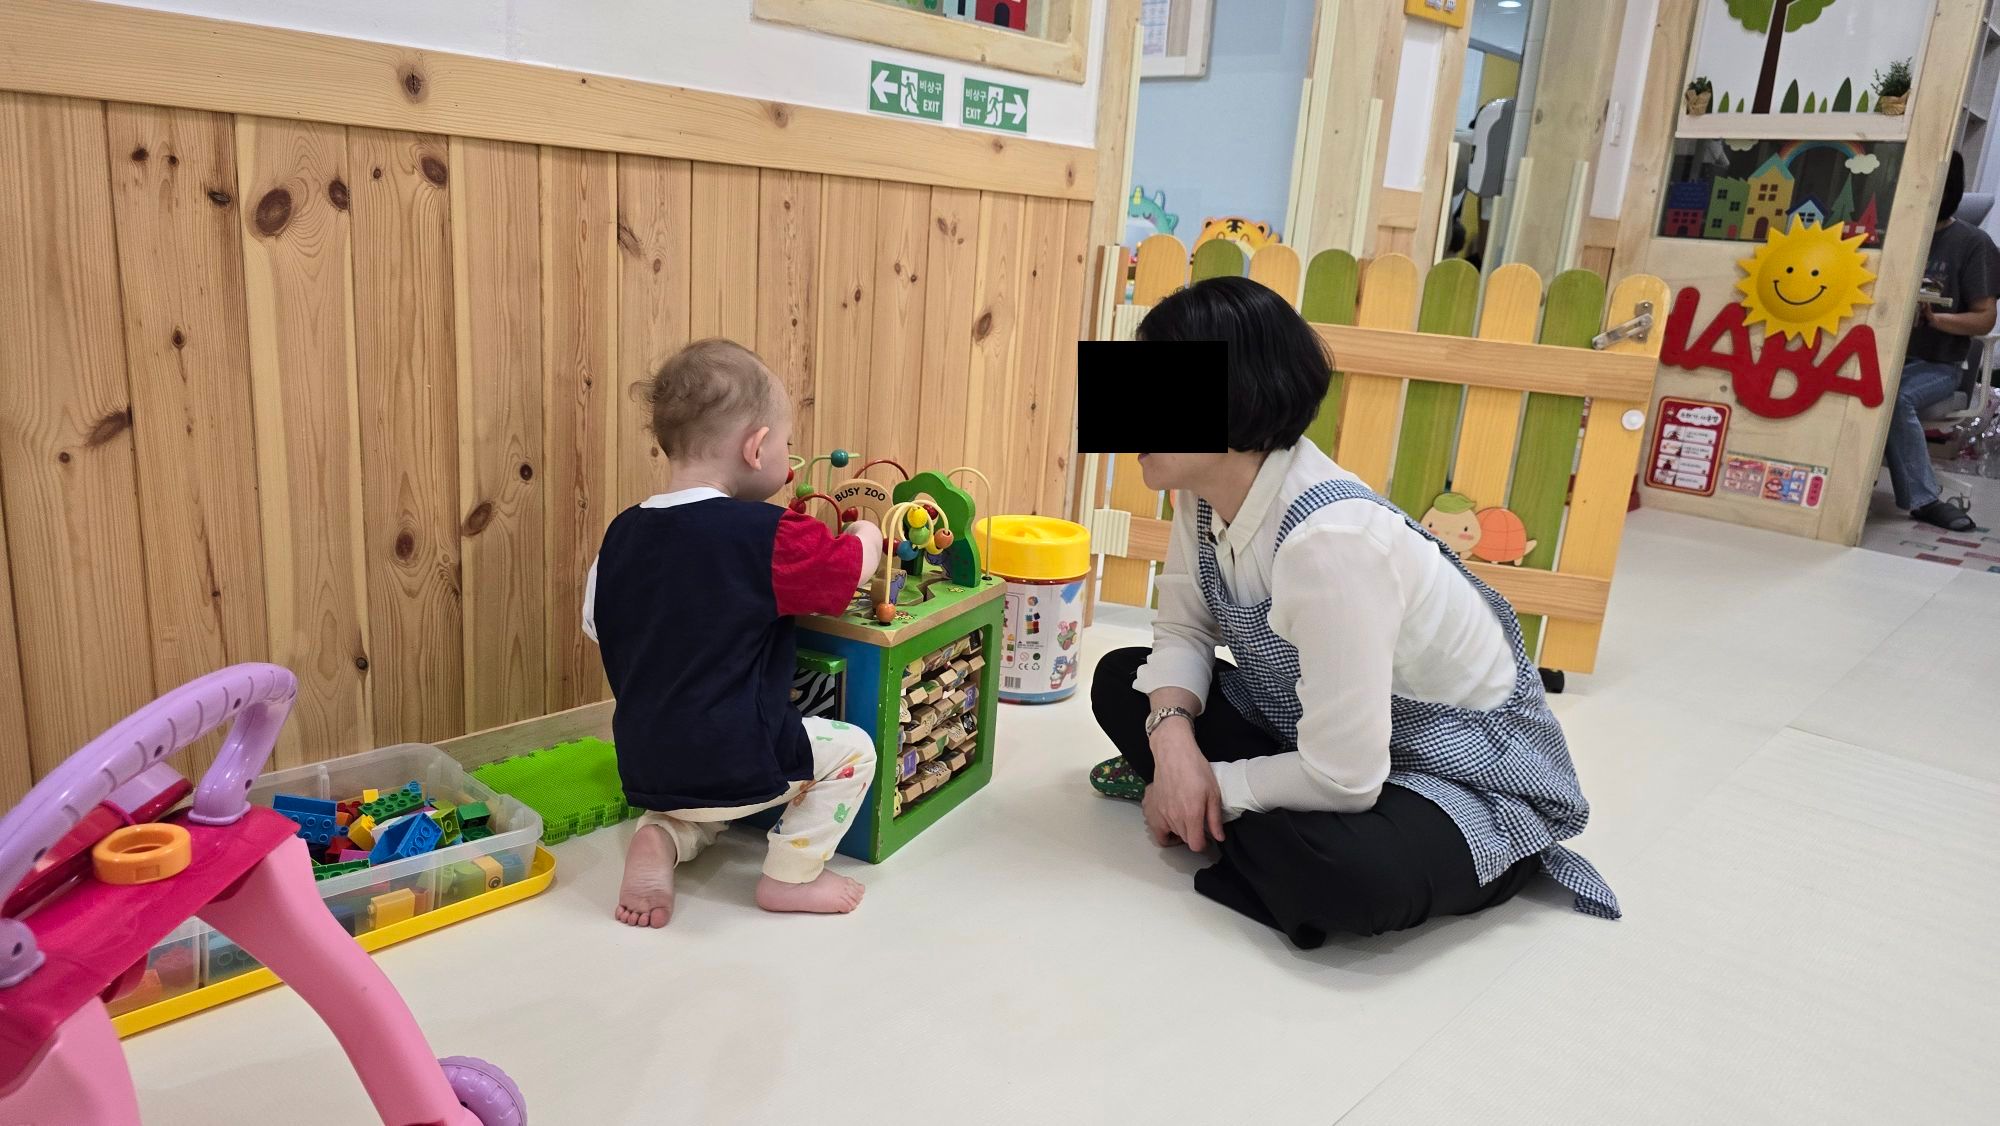 Boy plying with toys at daycare, teacher looking at him